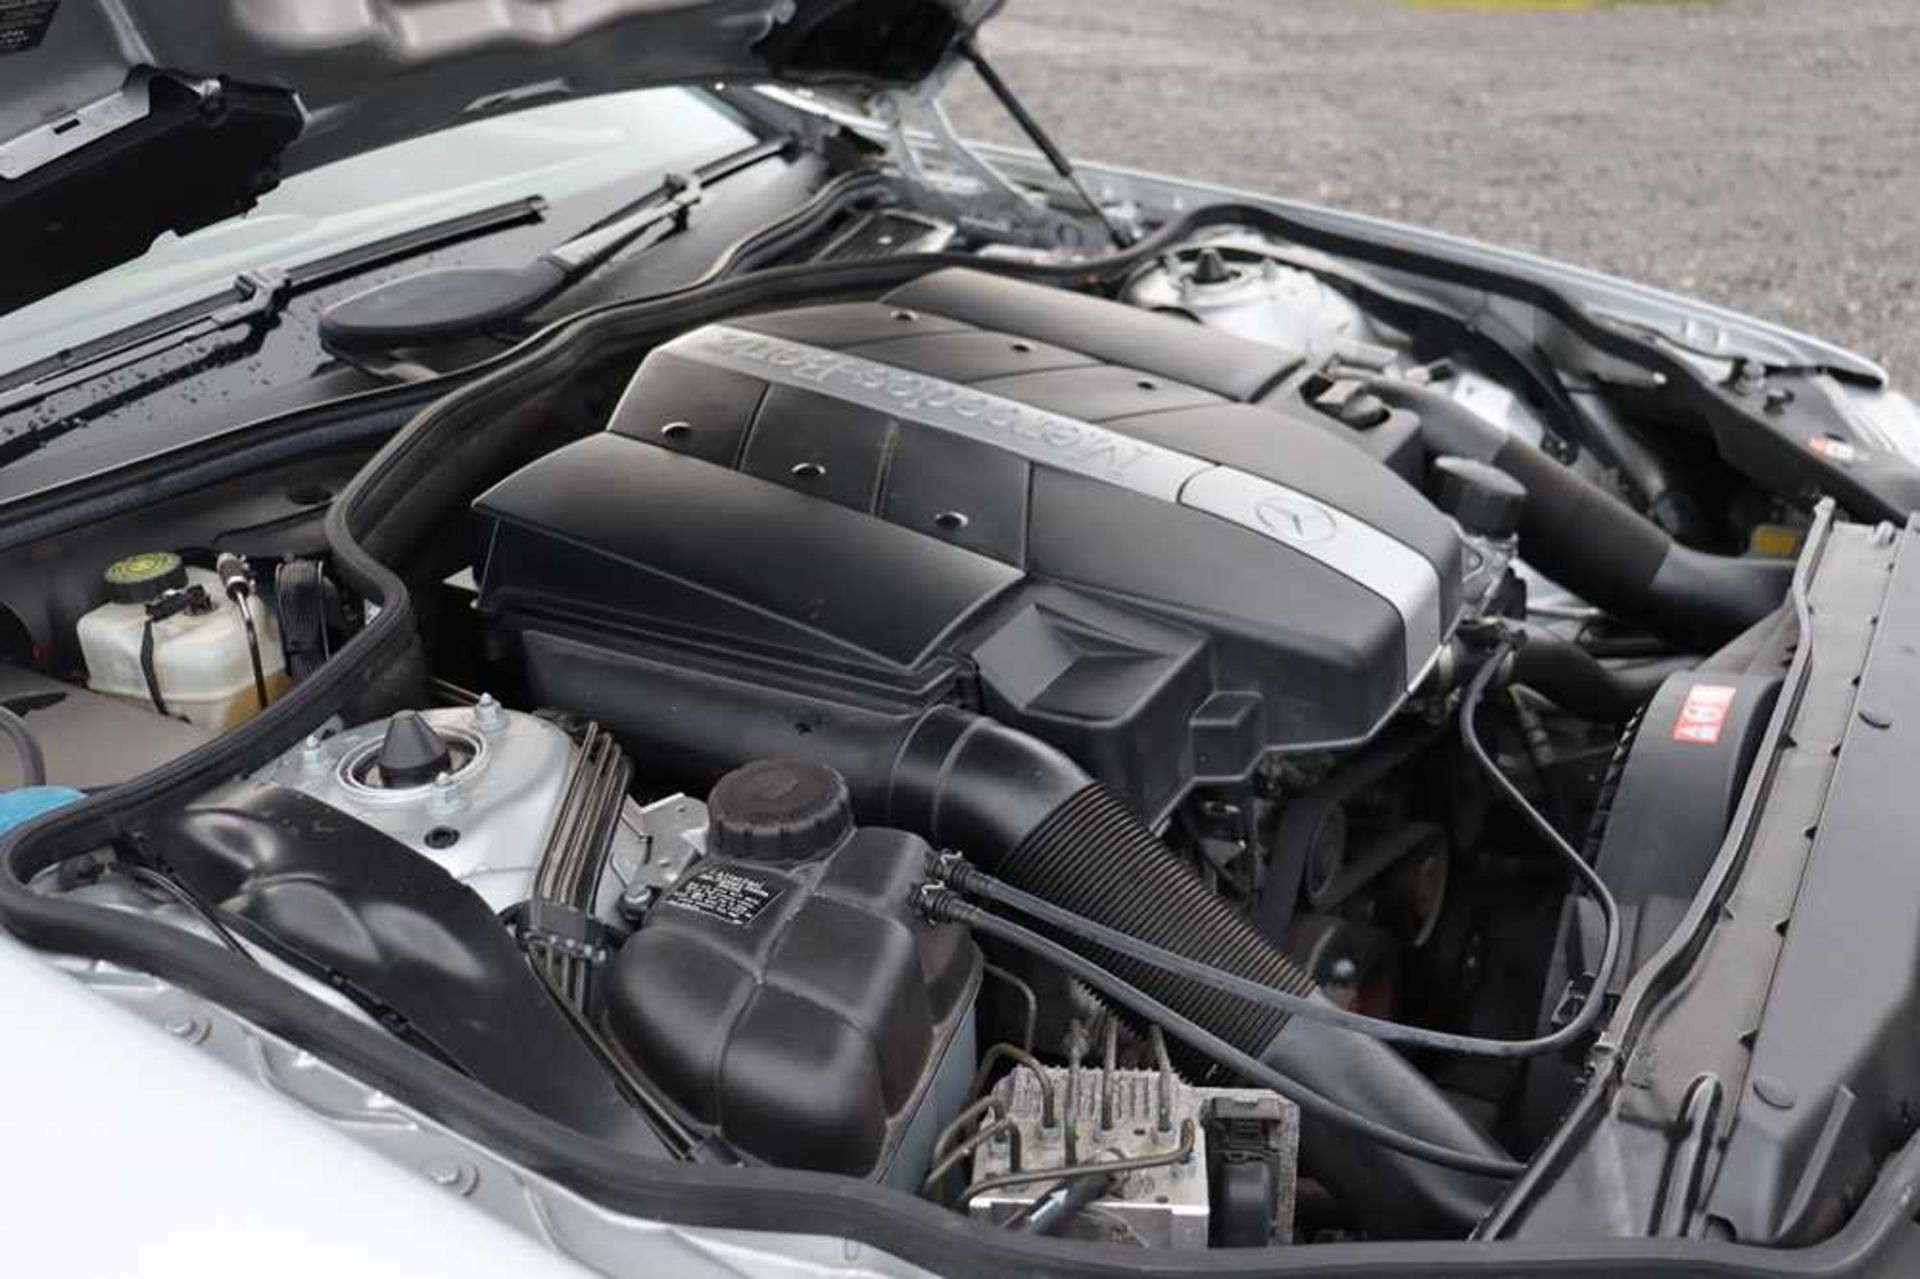 2005 Mercedes-Benz SL 350 Just 34,800 miles from new - Image 68 of 75